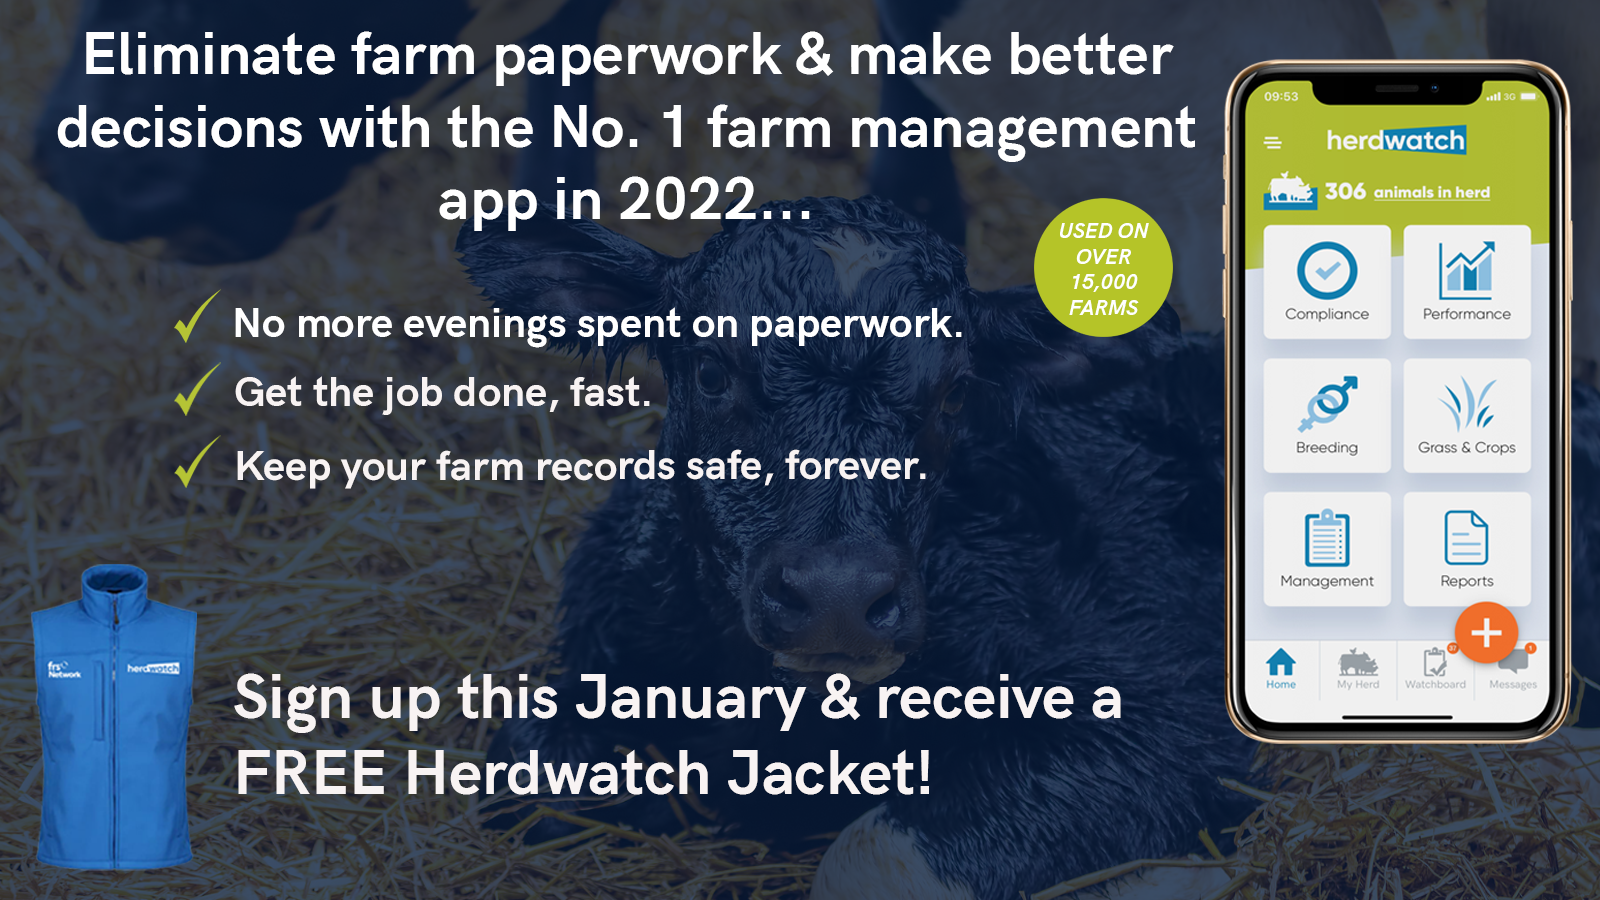 Sign up and get free Herdwatch jacket offer poster